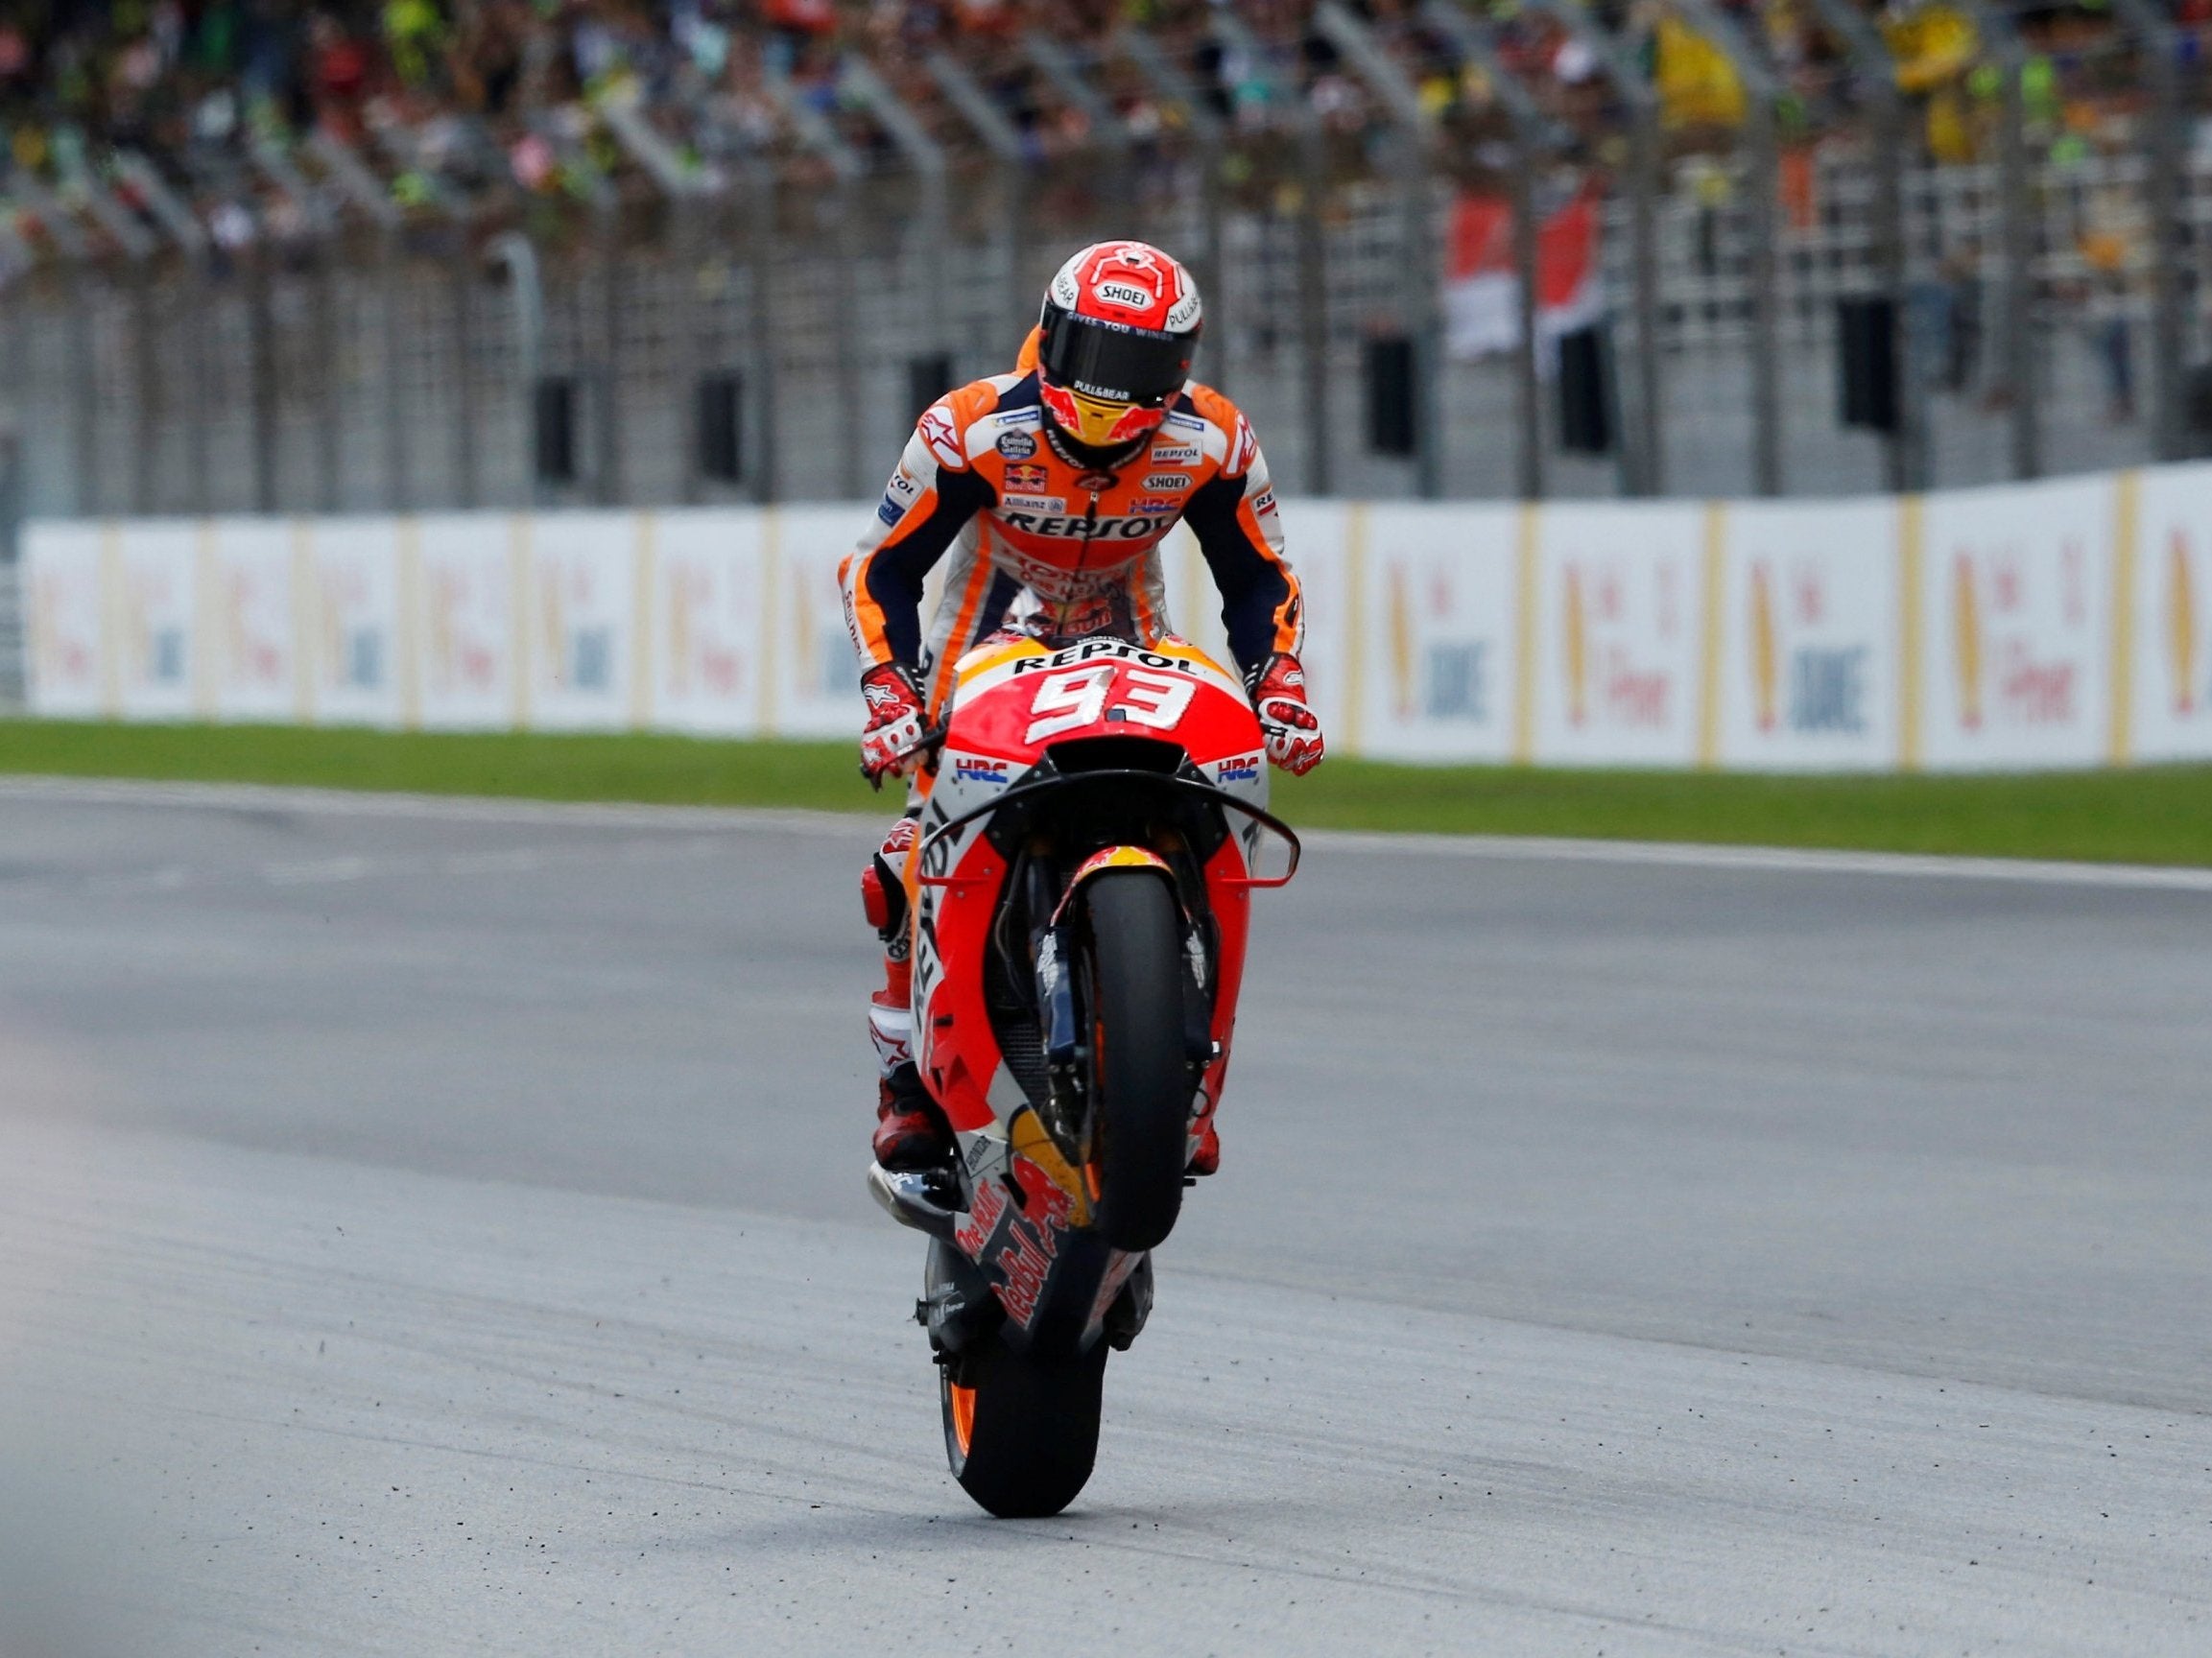 Marc Marquez took his ninth victory of the season